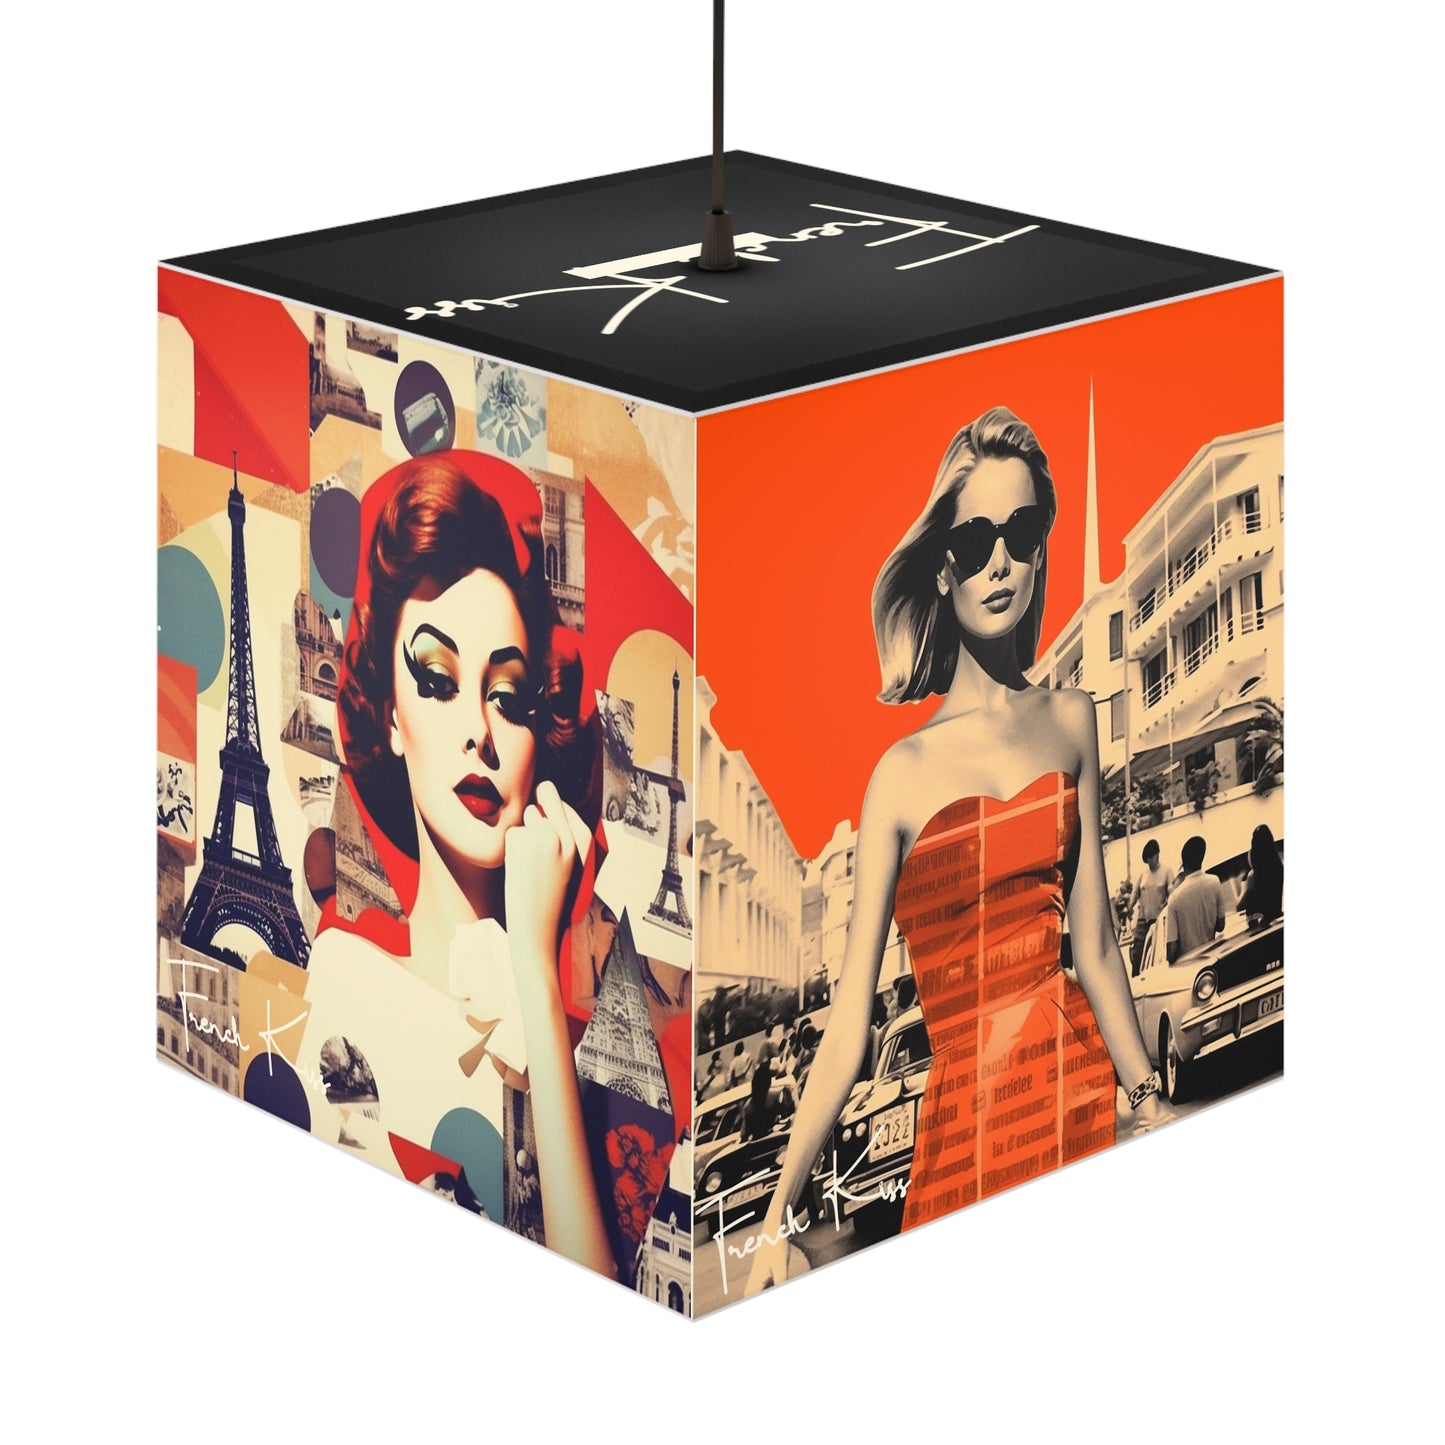 ALLUME Sexy Chic Light Cube Lamp, French Kiss Glamour Lifestyle Fashion Haute Couture Travel Pop Art Interior Designer Luxe Luxury